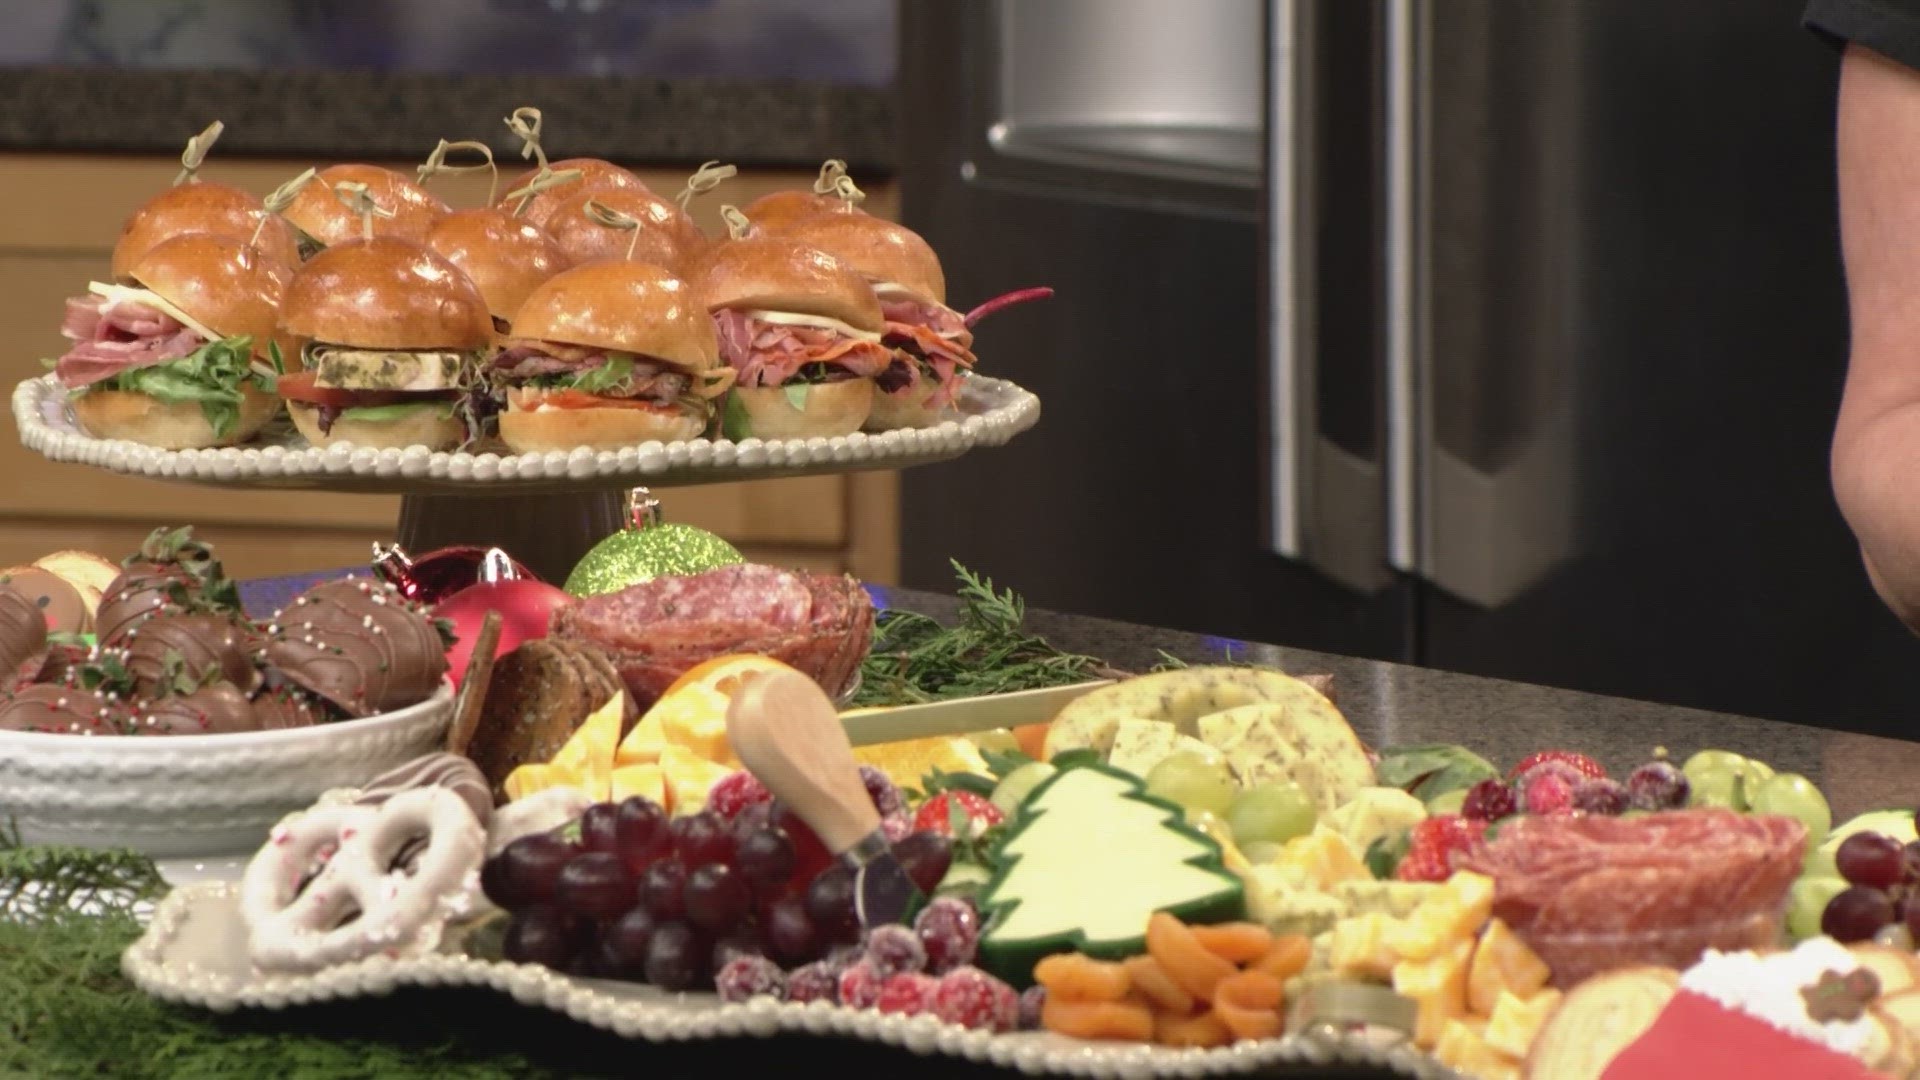 Katie Hogan, owner of Bleu & Brie Co. in Lorain, stopped by Tuesday's Front Row with some helpful tips for your holiday dinner table.